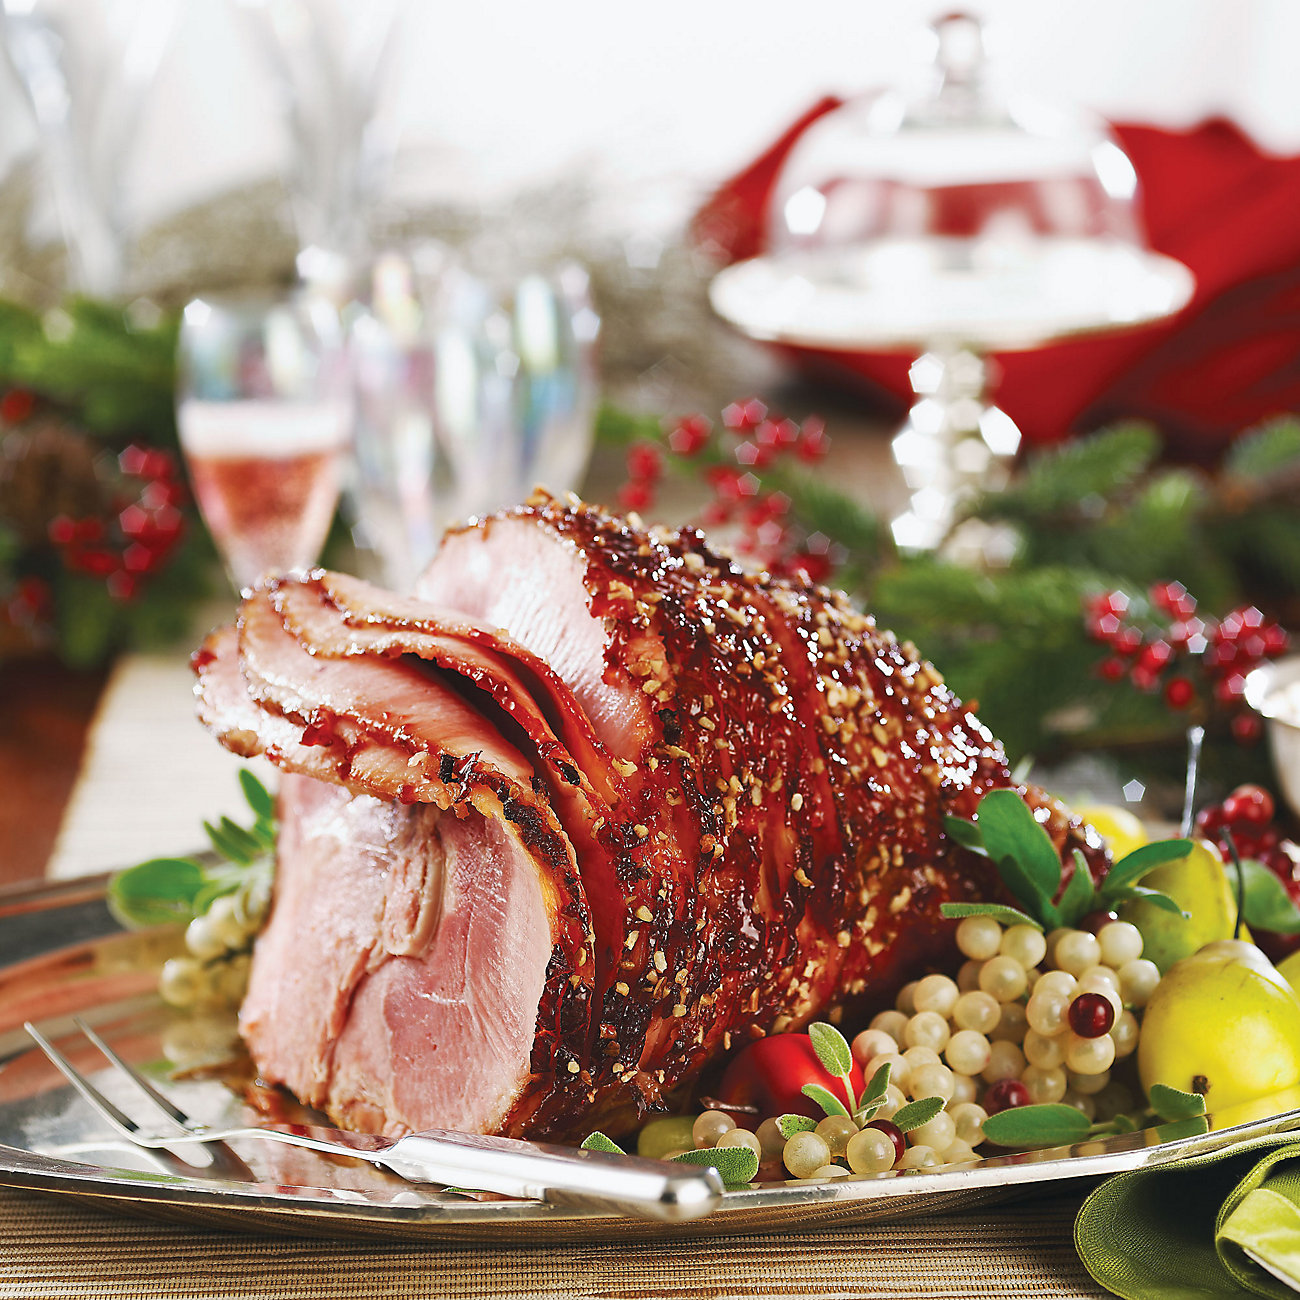 https://images.heb.com/is/image/HEBGrocery/Large/holiday-ham-with-a-texas-twist-recipe-1.jpg